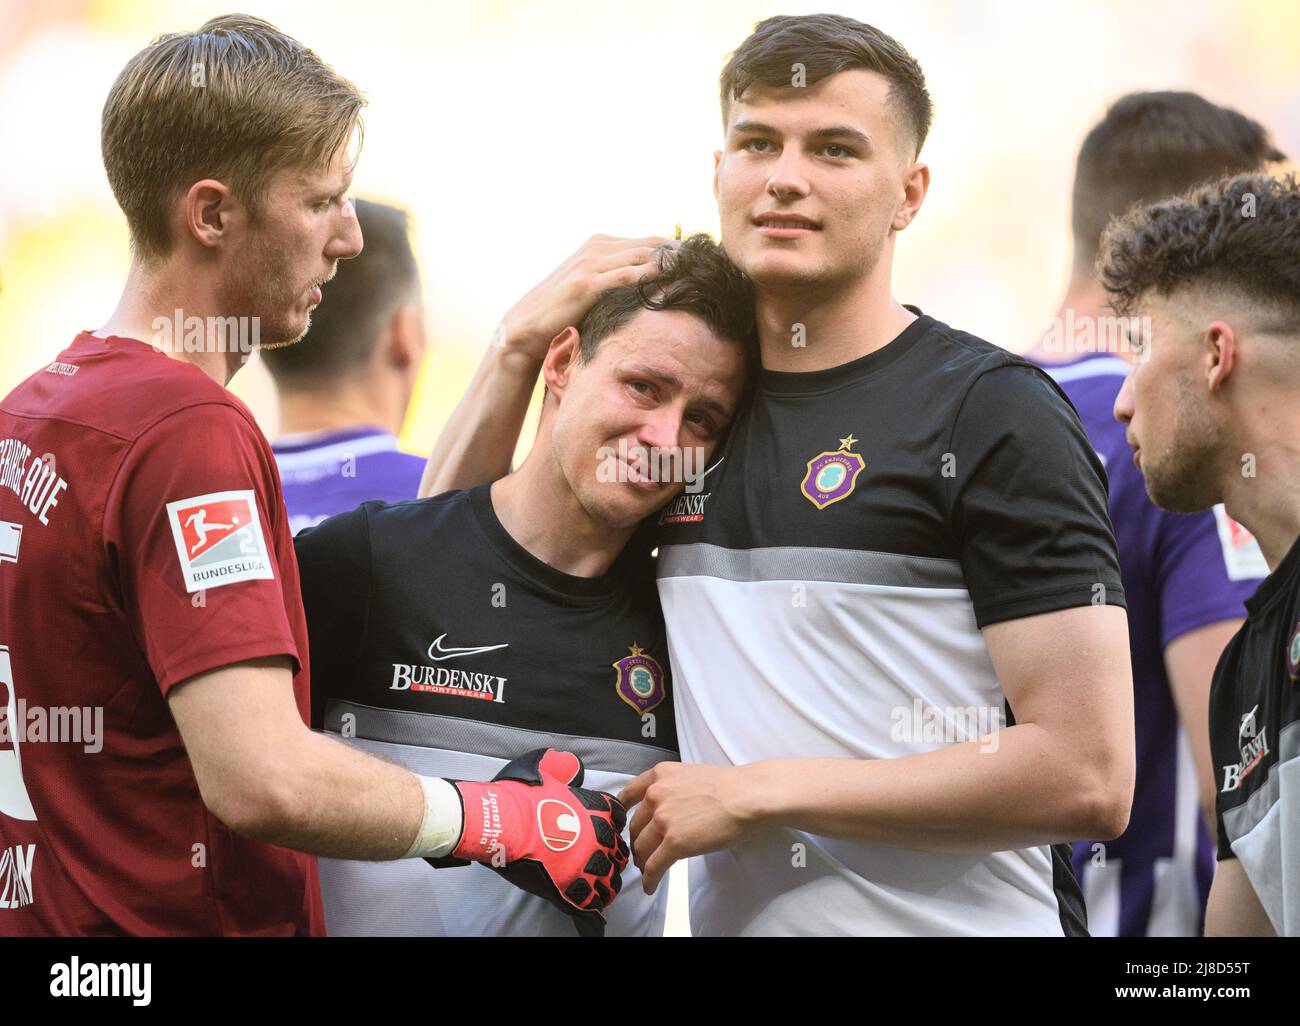 15 May 2022, Saxony, Dresden: Soccer: 2nd Bundesliga, SG Dynamo Dresden - FC Erzgebirge Aue, Matchday 34, Rudolf Harbig Stadium. Aue's Clemens Fandrich (M) cries after the win and is comforted by goalkeeper Philipp Klewin (l) and Ramzi Ferjani. Photo: Robert Michael/dpa - IMPORTANT NOTE: In accordance with the requirements of the DFL Deutsche Fußball Liga and the DFB Deutscher Fußball-Bund, it is prohibited to use or have used photographs taken in the stadium and/or of the match in the form of sequence pictures and/or video-like photo series. Stock Photo